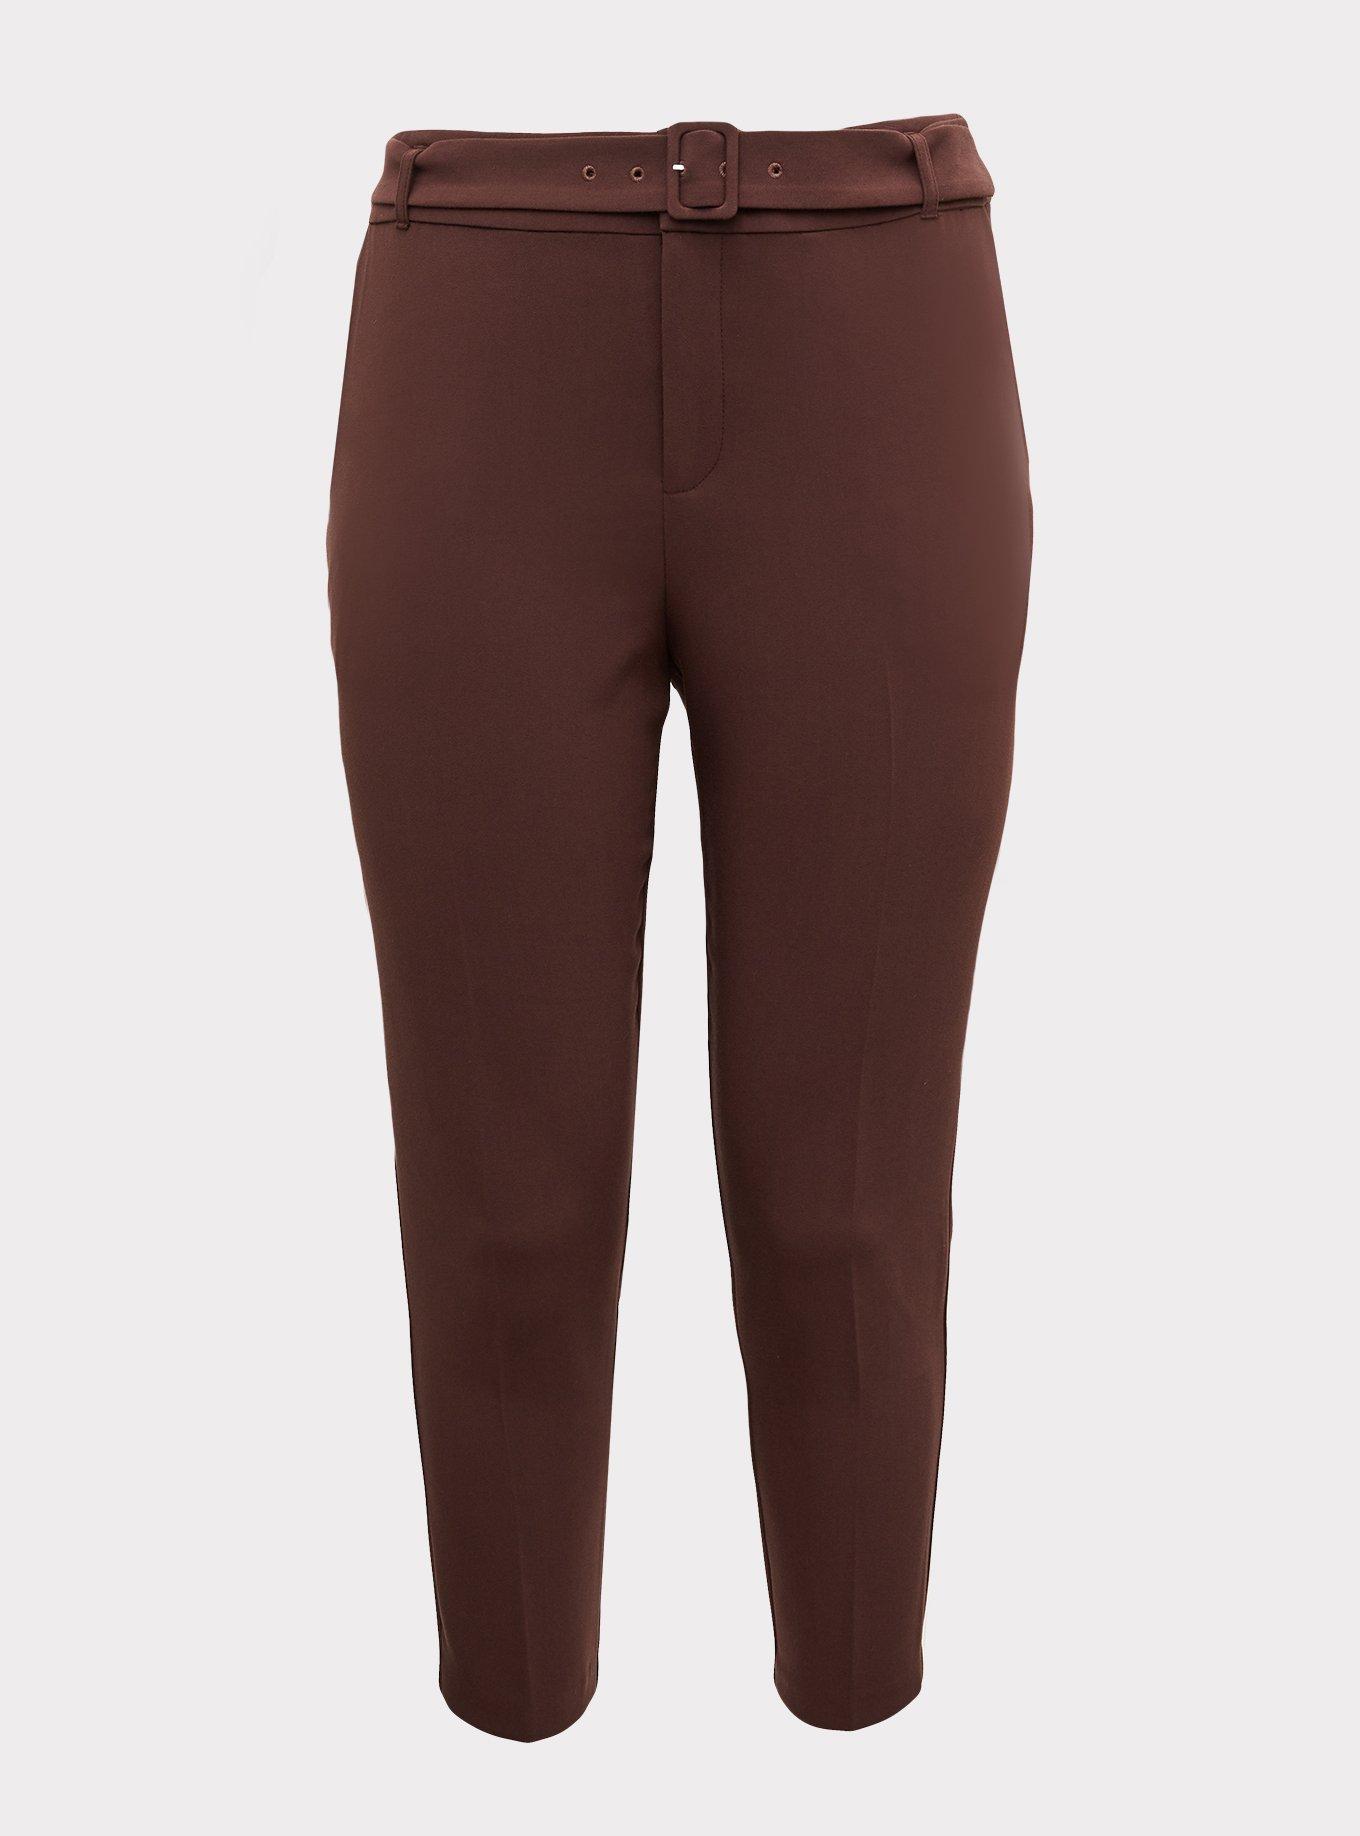 Plus Size - Stretch Woven Belted Straight Leg Trouser Pant - Raisin ...